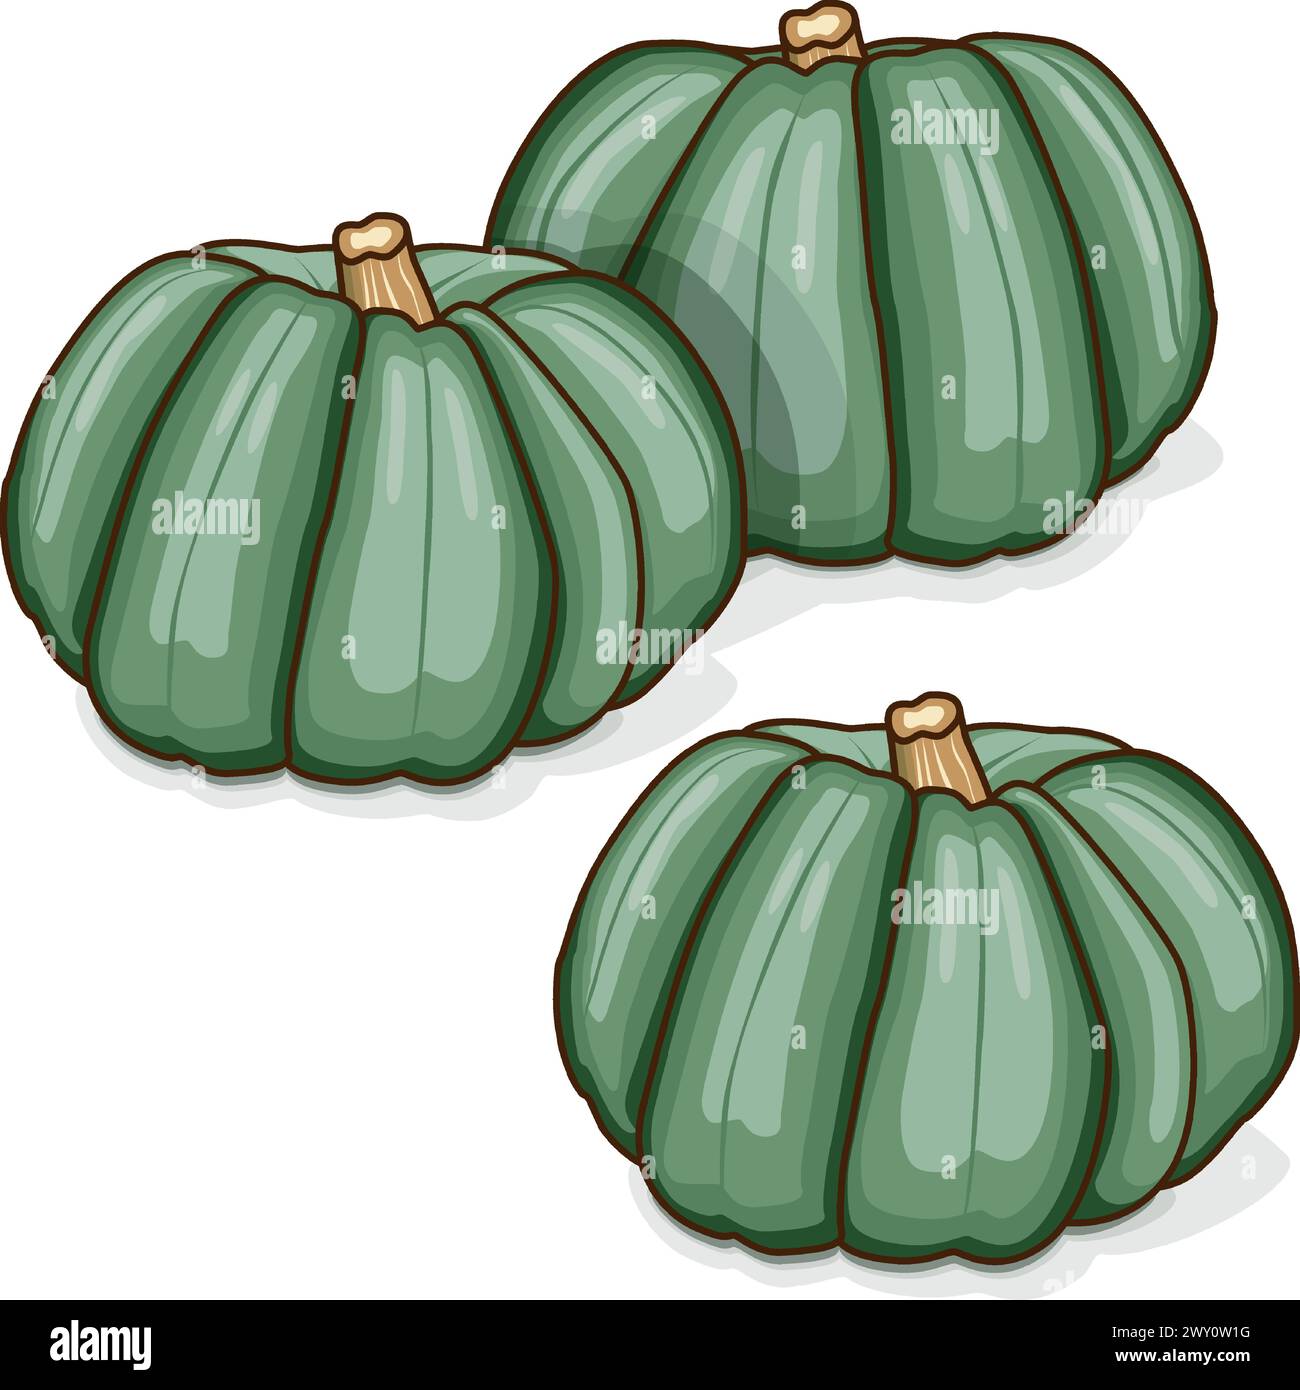 Group of Blue pumpkin. Winter squash. Cucurbita maxima. Fruits and vegetables. Clipart. Isolated vector illustration. Stock Vector